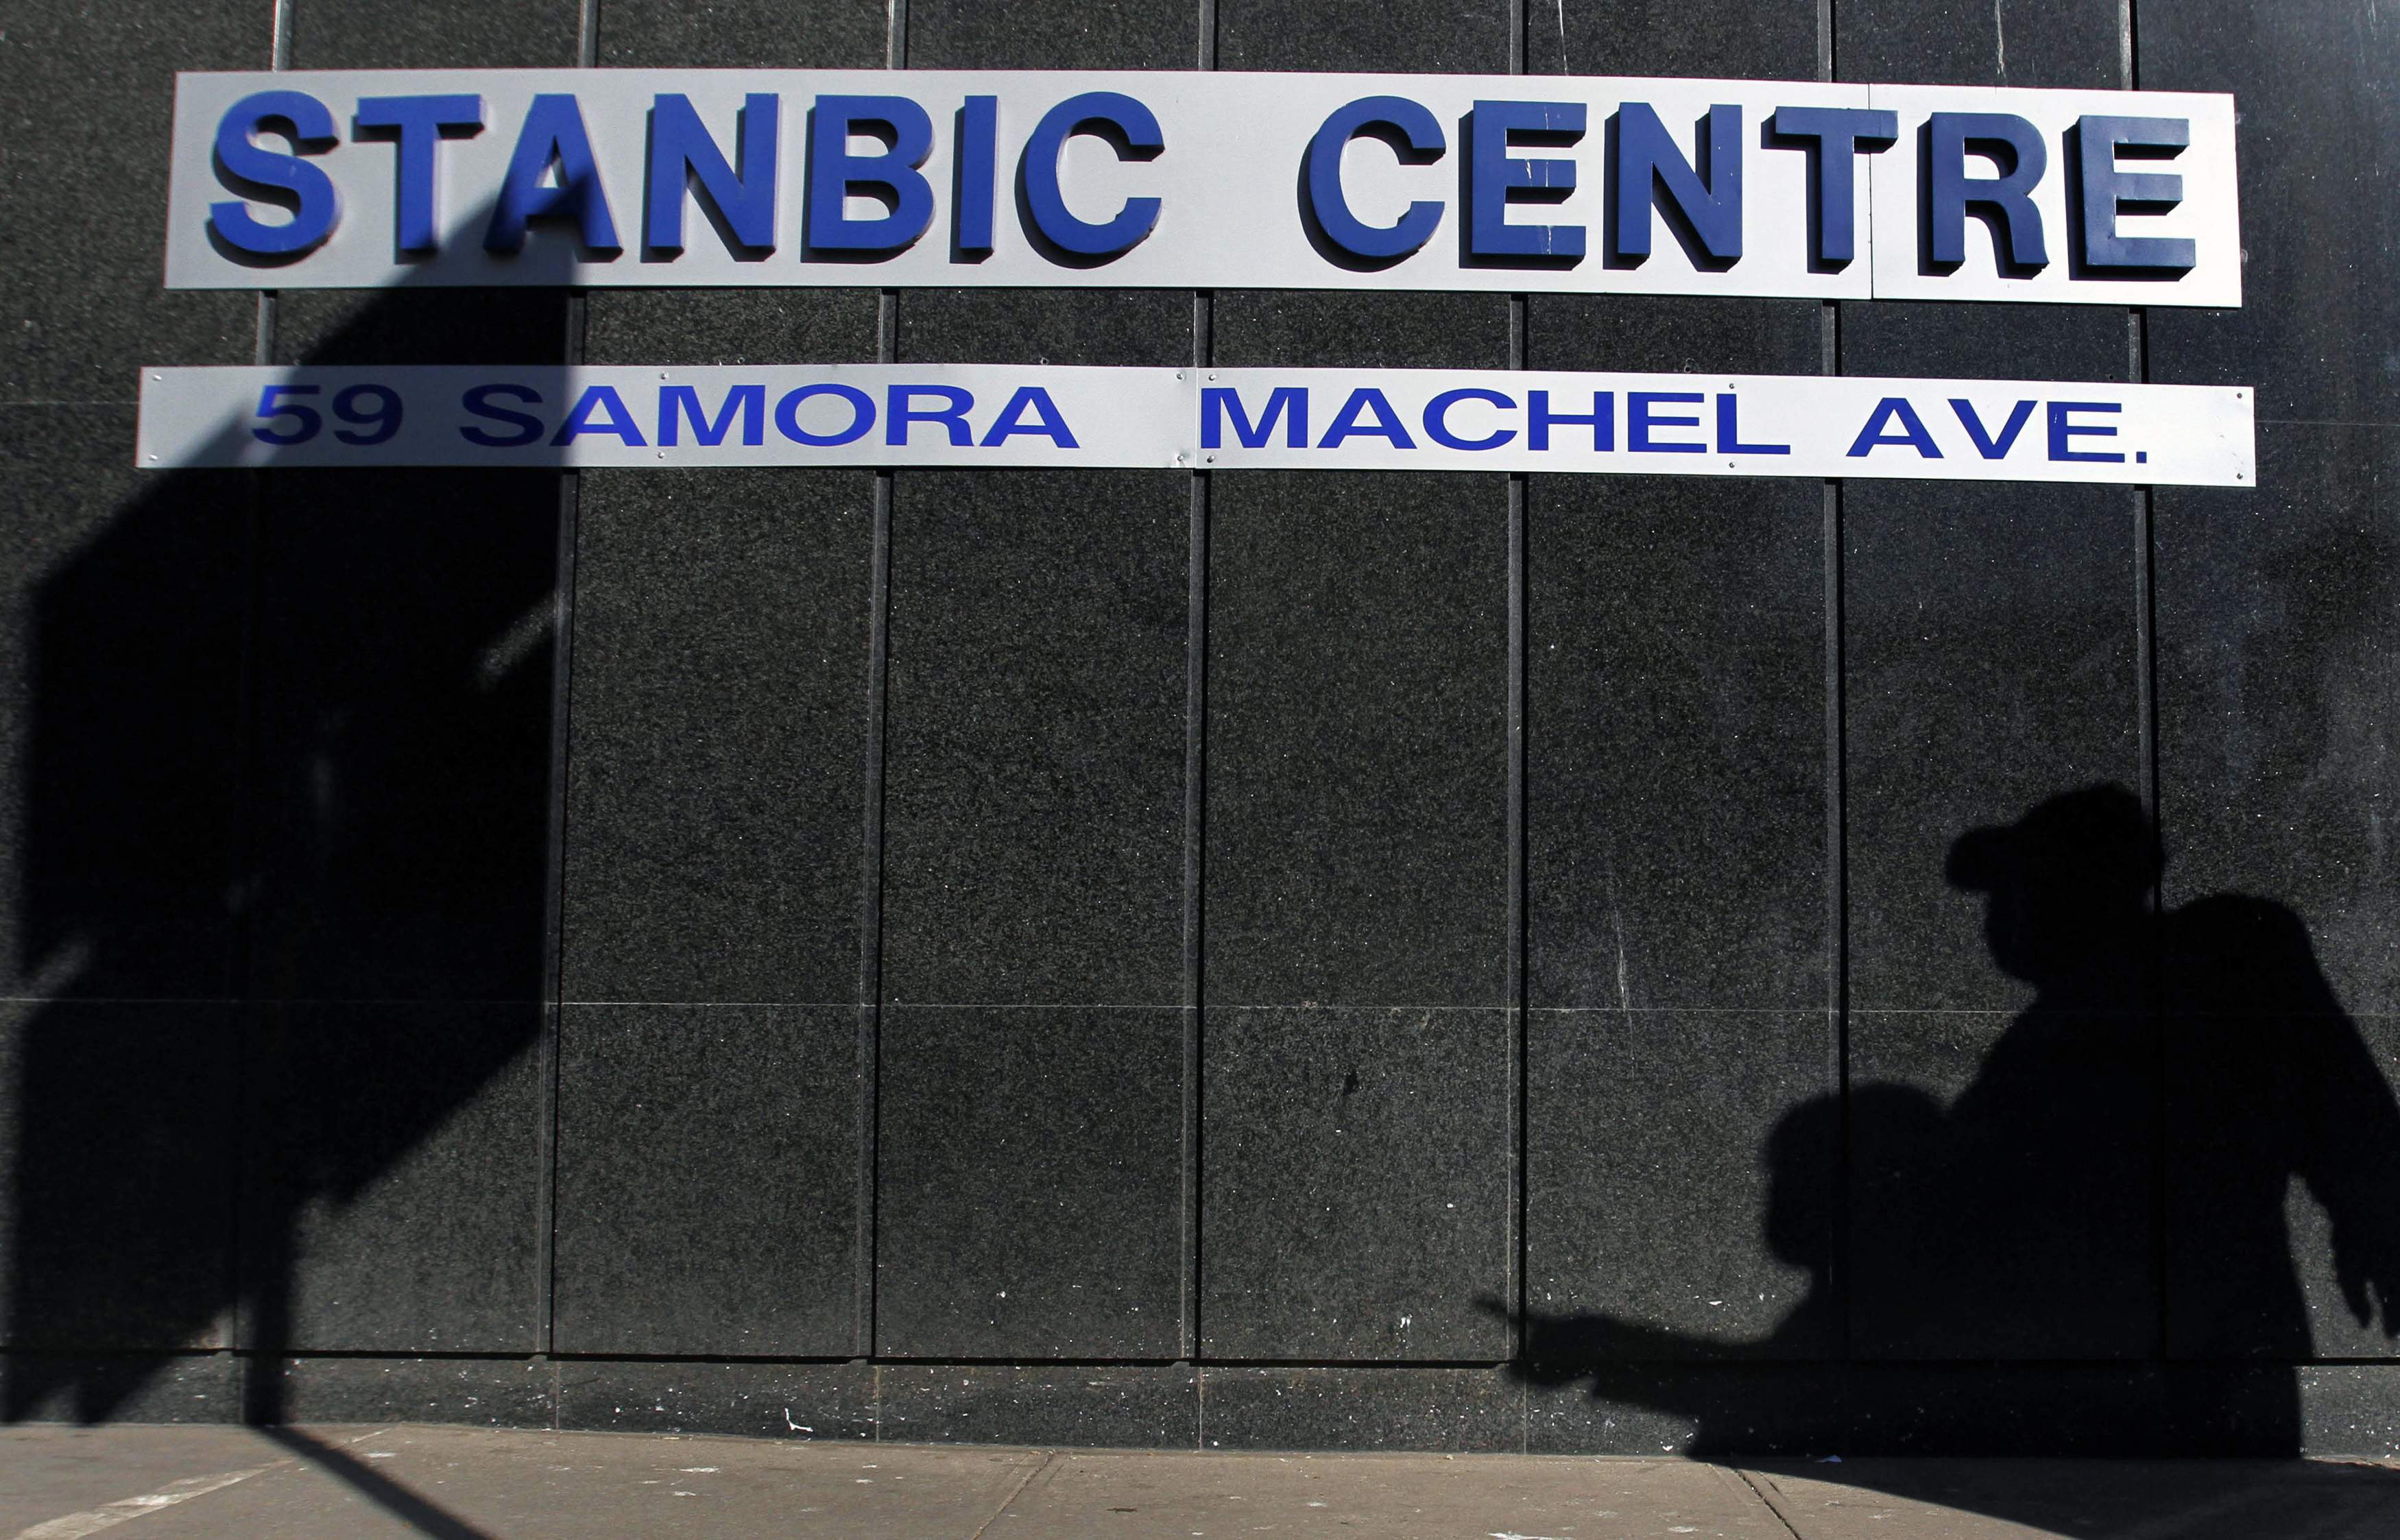 Stanbic is the Best Foreign Exchange Provider in Africa